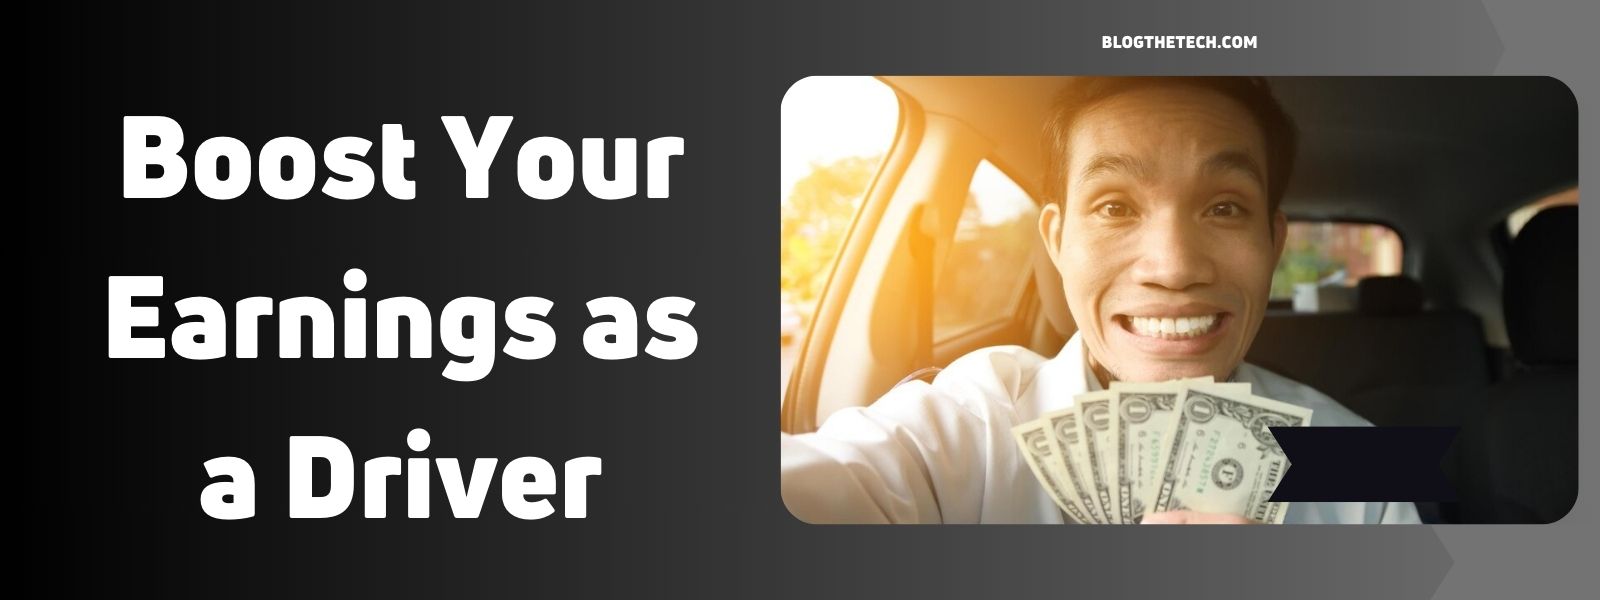 Boost Your Earnings as a Driver